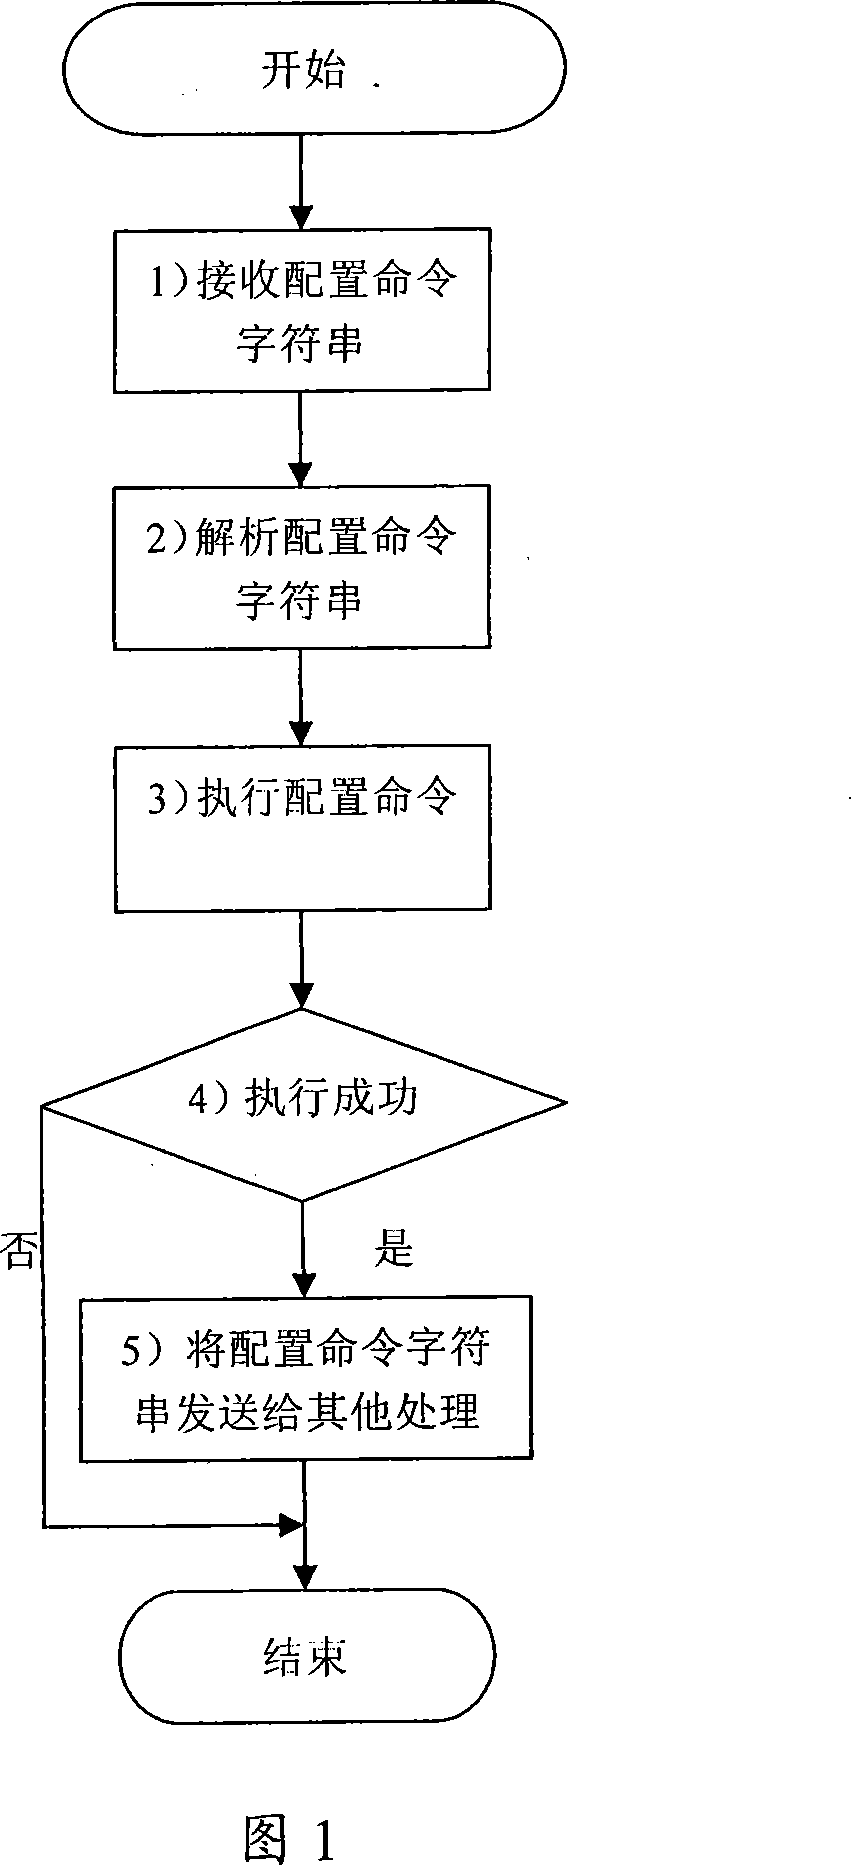 Method of implementing command line configuration distribution in distributed system